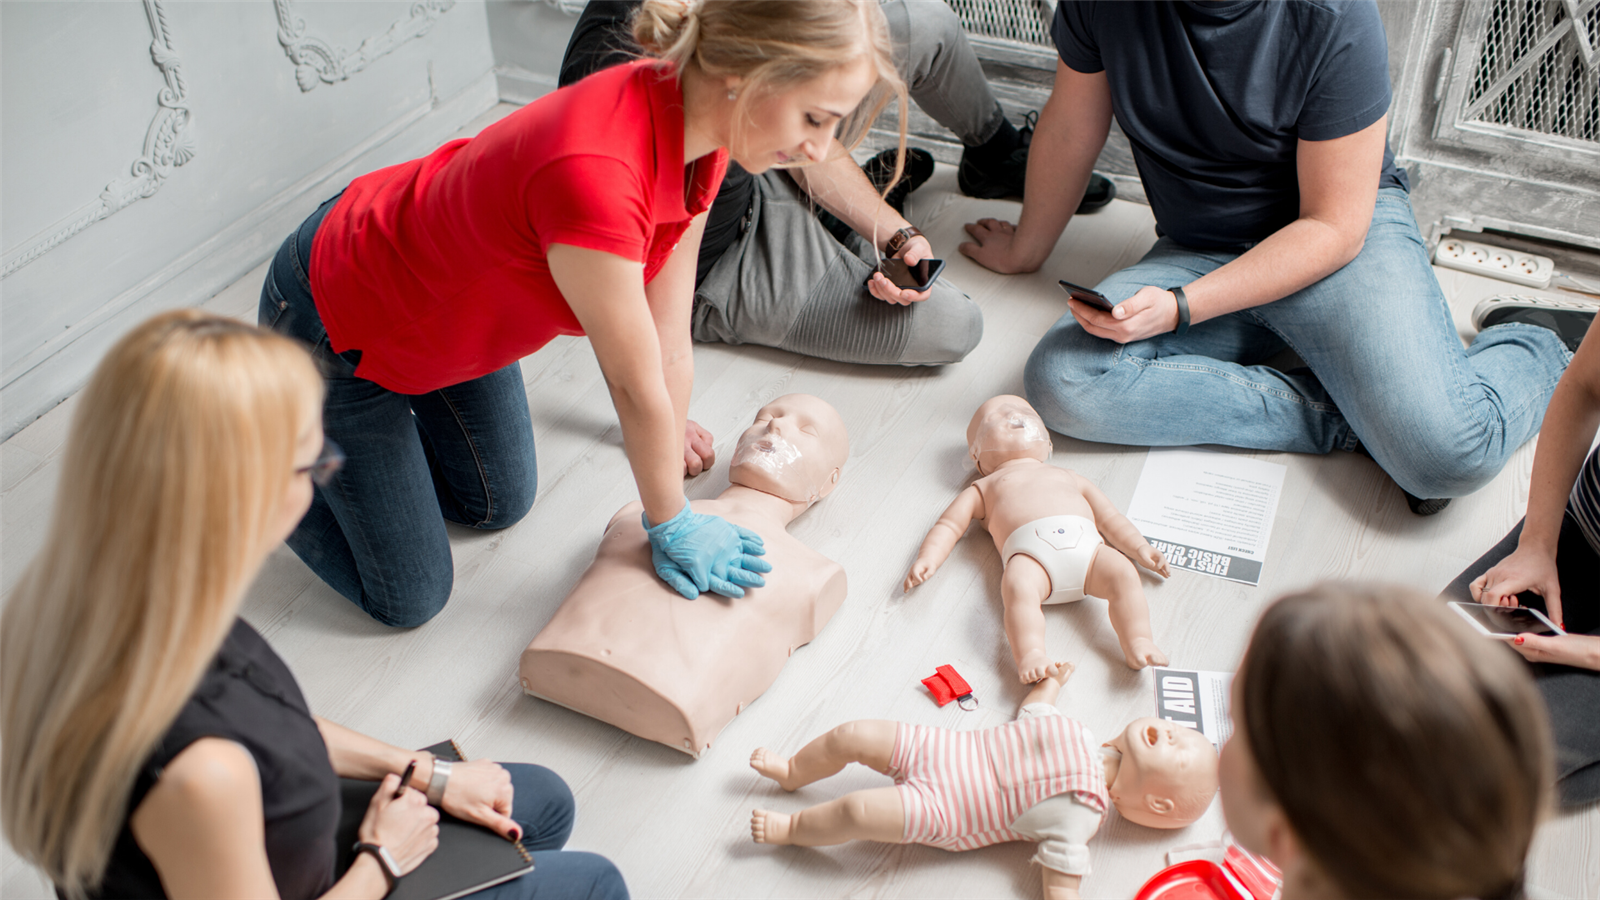 Student practices chest compressions on dummy